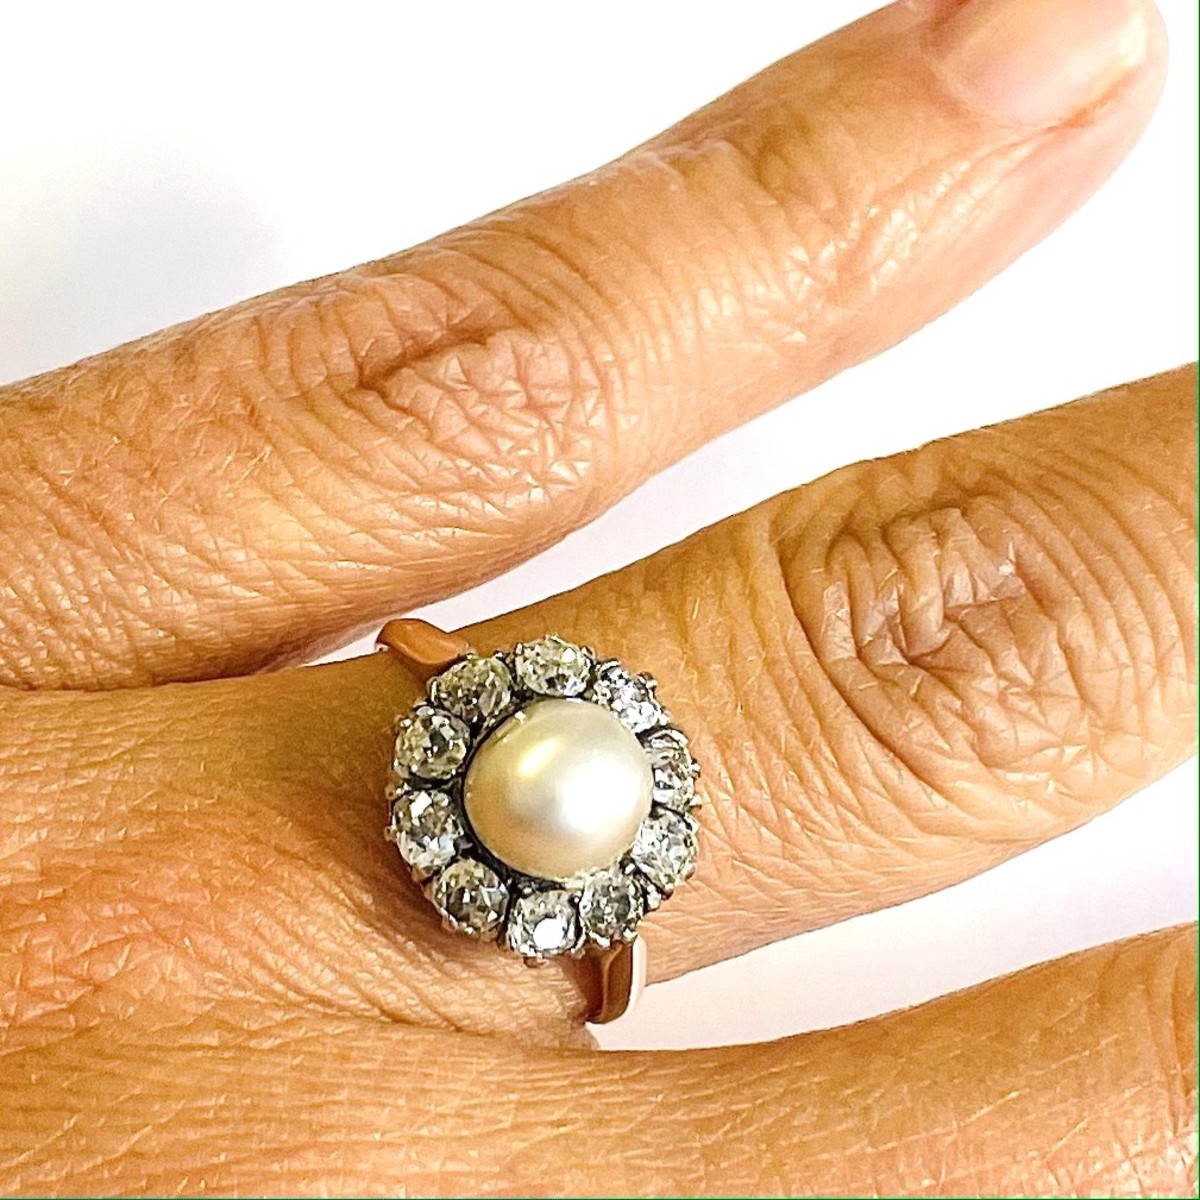 Victorian Silver & 18KT Yellow Gold Natural Pearl & Diamond Ring on finger